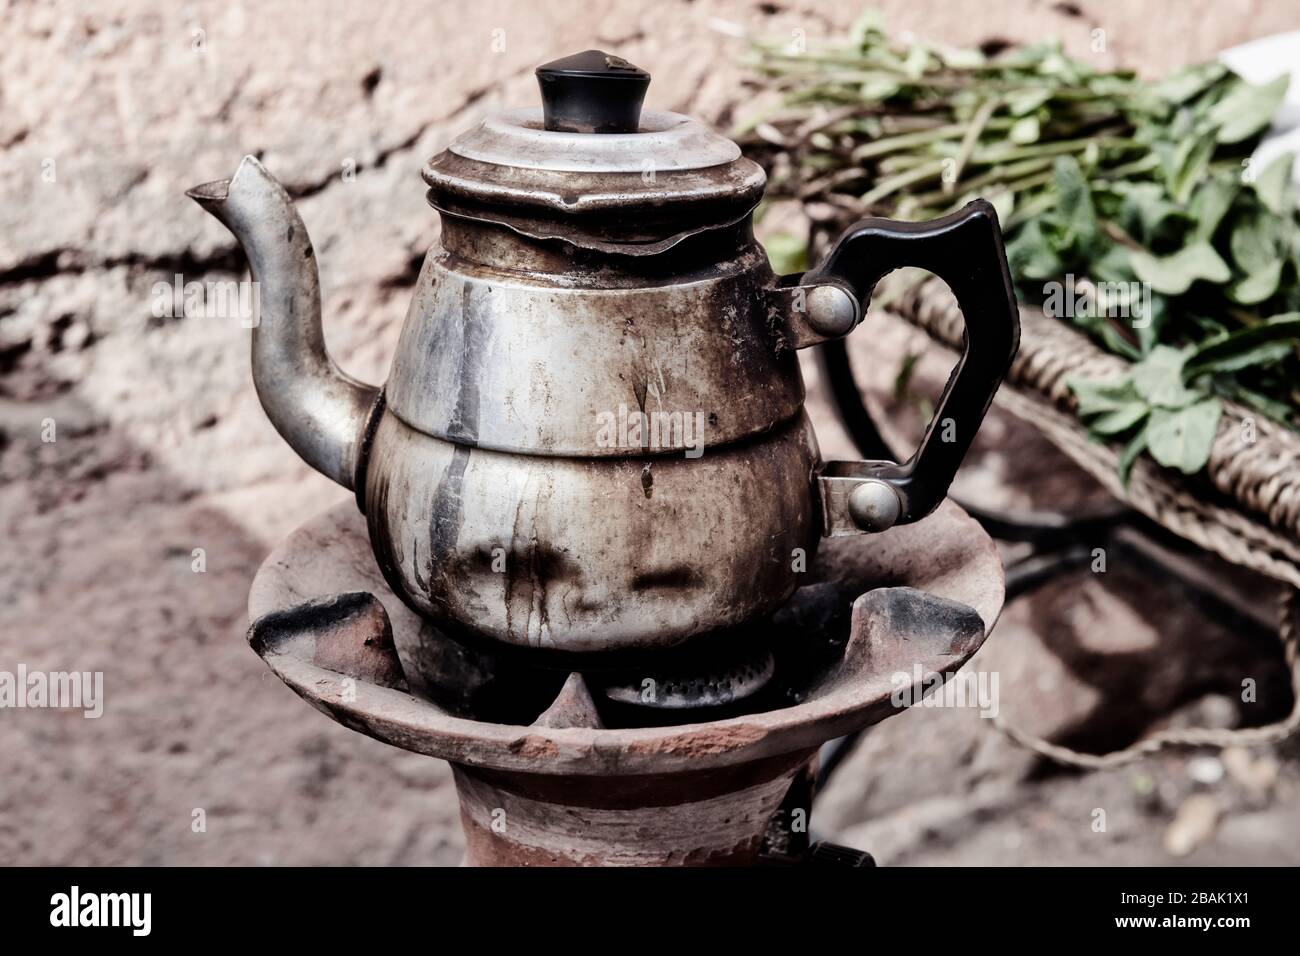 Old rusty teapot with Moroccan mint. Vintage image with film grain. Stock Photo